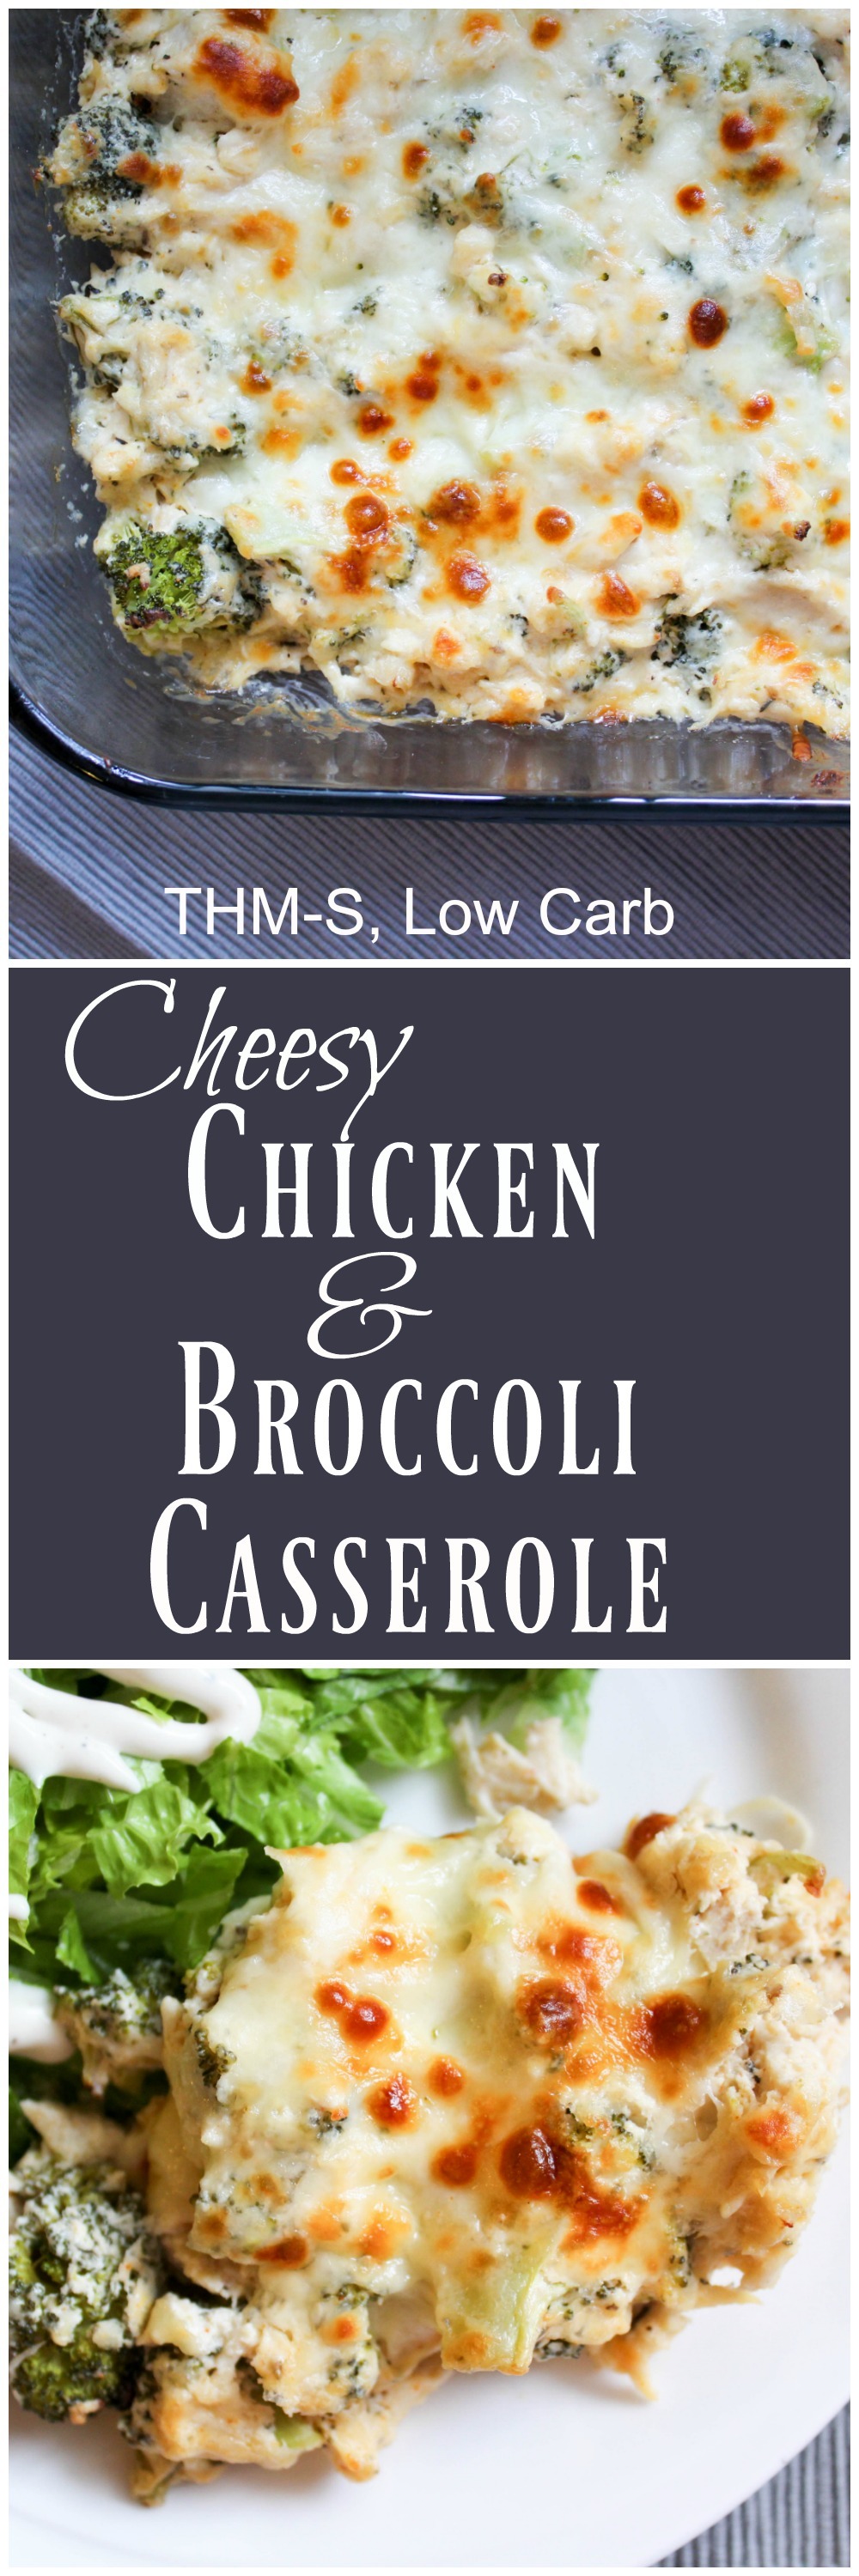 Cheesy Chicken and Broccoli Casserole (THM-S, Low Carb)